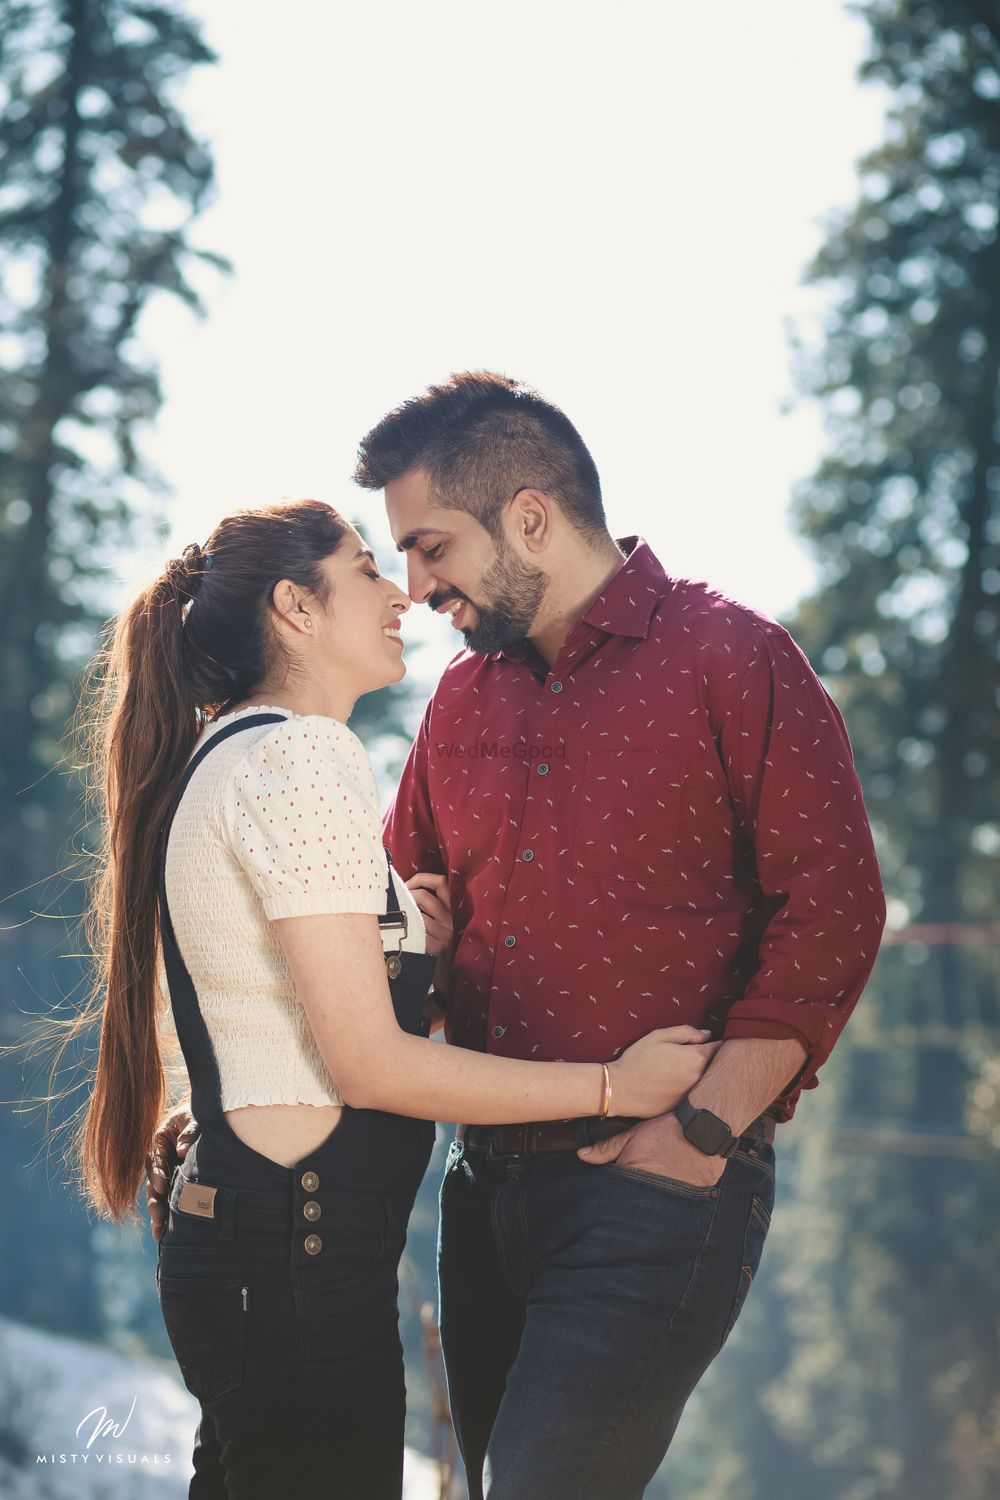 Photo From Ishaan Tanya - By Misty Visuals - Pre Wedding Photography